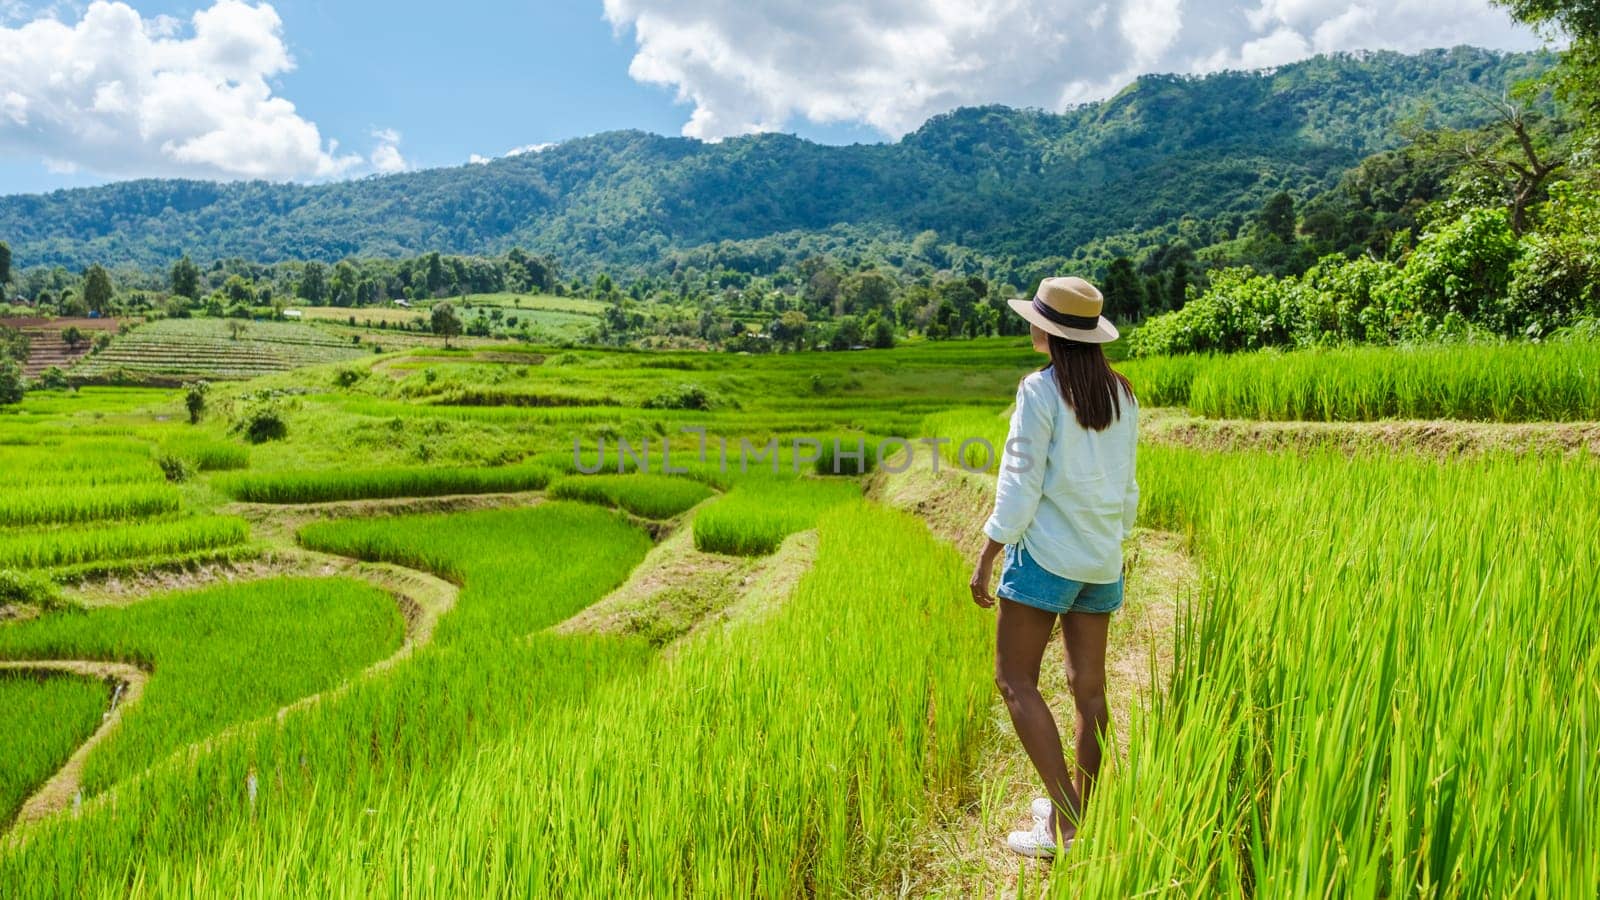 Asian woman watching the Terraced Rice Field in Chiangmai during the green rain season, Thailand. Royal Project Khun Pae Northern Thailand